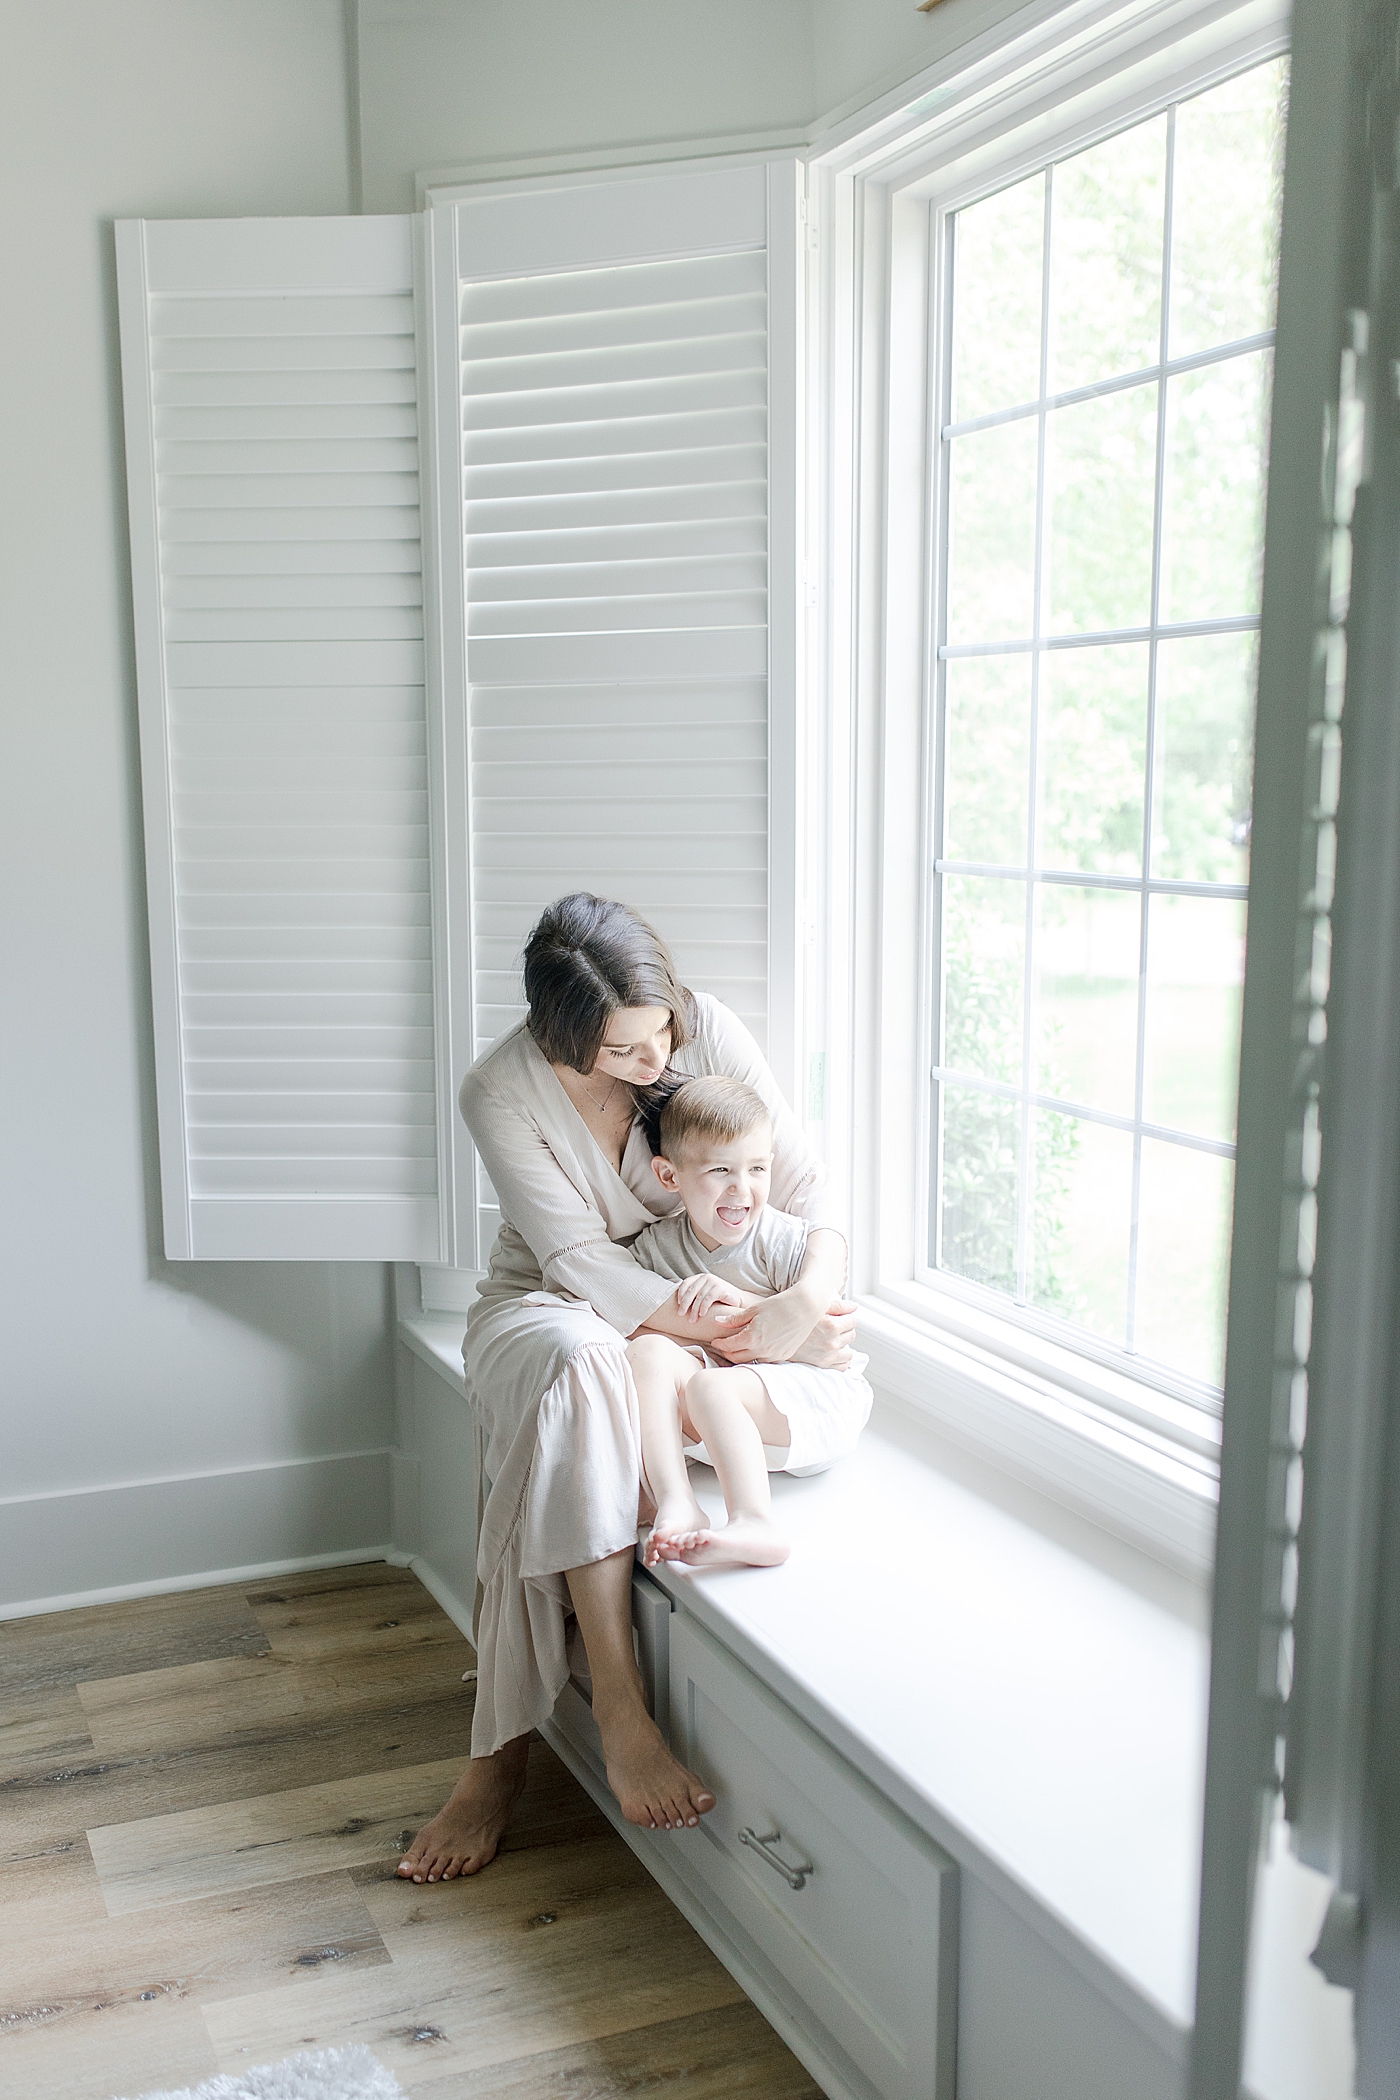 Mom and son sitting in window seat. Photo by Little Sunshine Photography